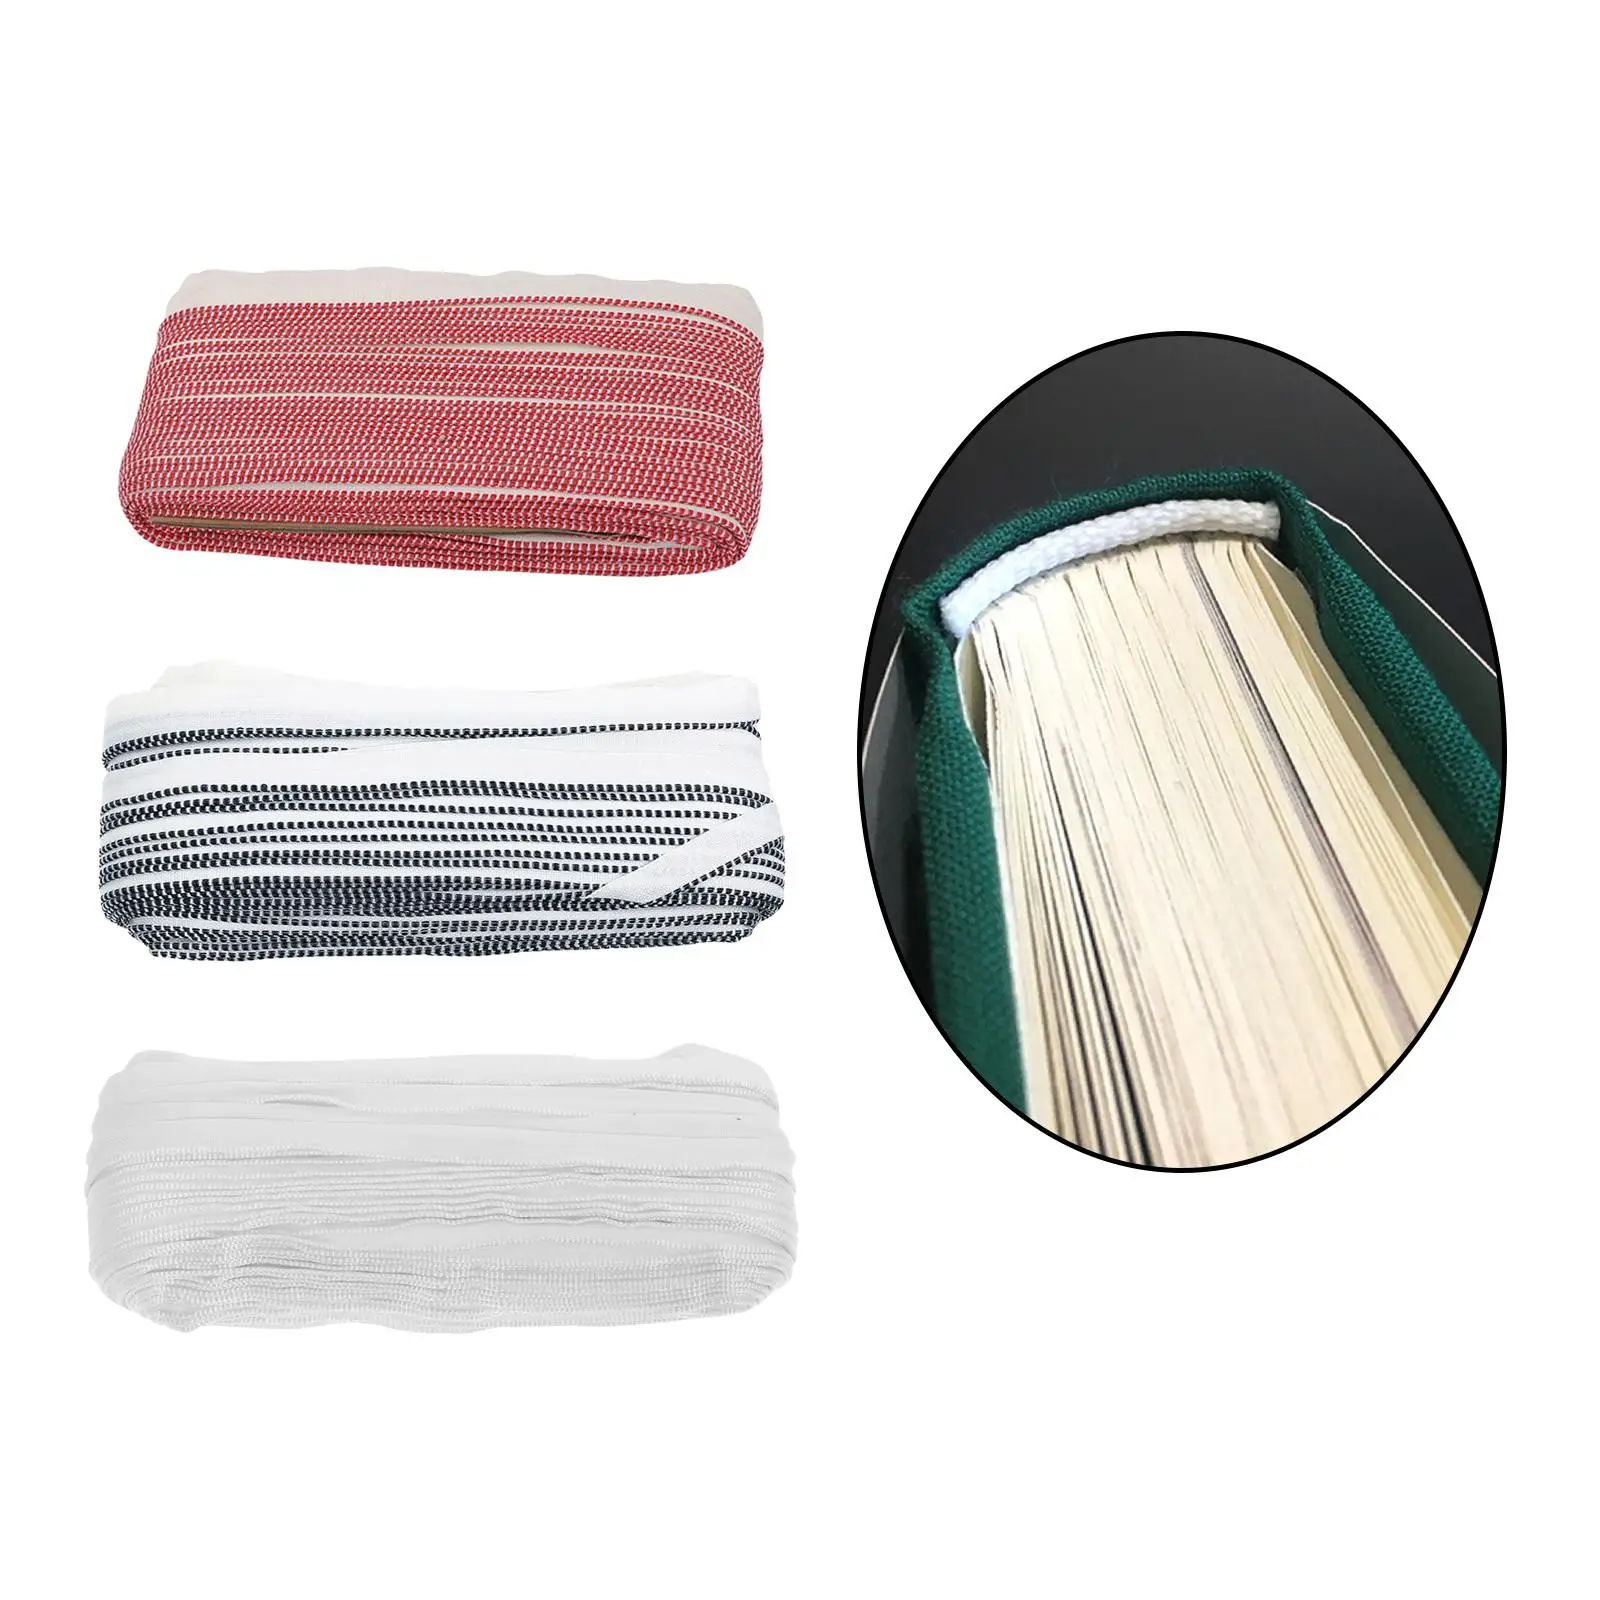 Elastic Band Book Press Decoration 100M Ribbon 1 Roll Width 1.5cm Polyester Trash Can Band Book Tail Band Book Binding Materials